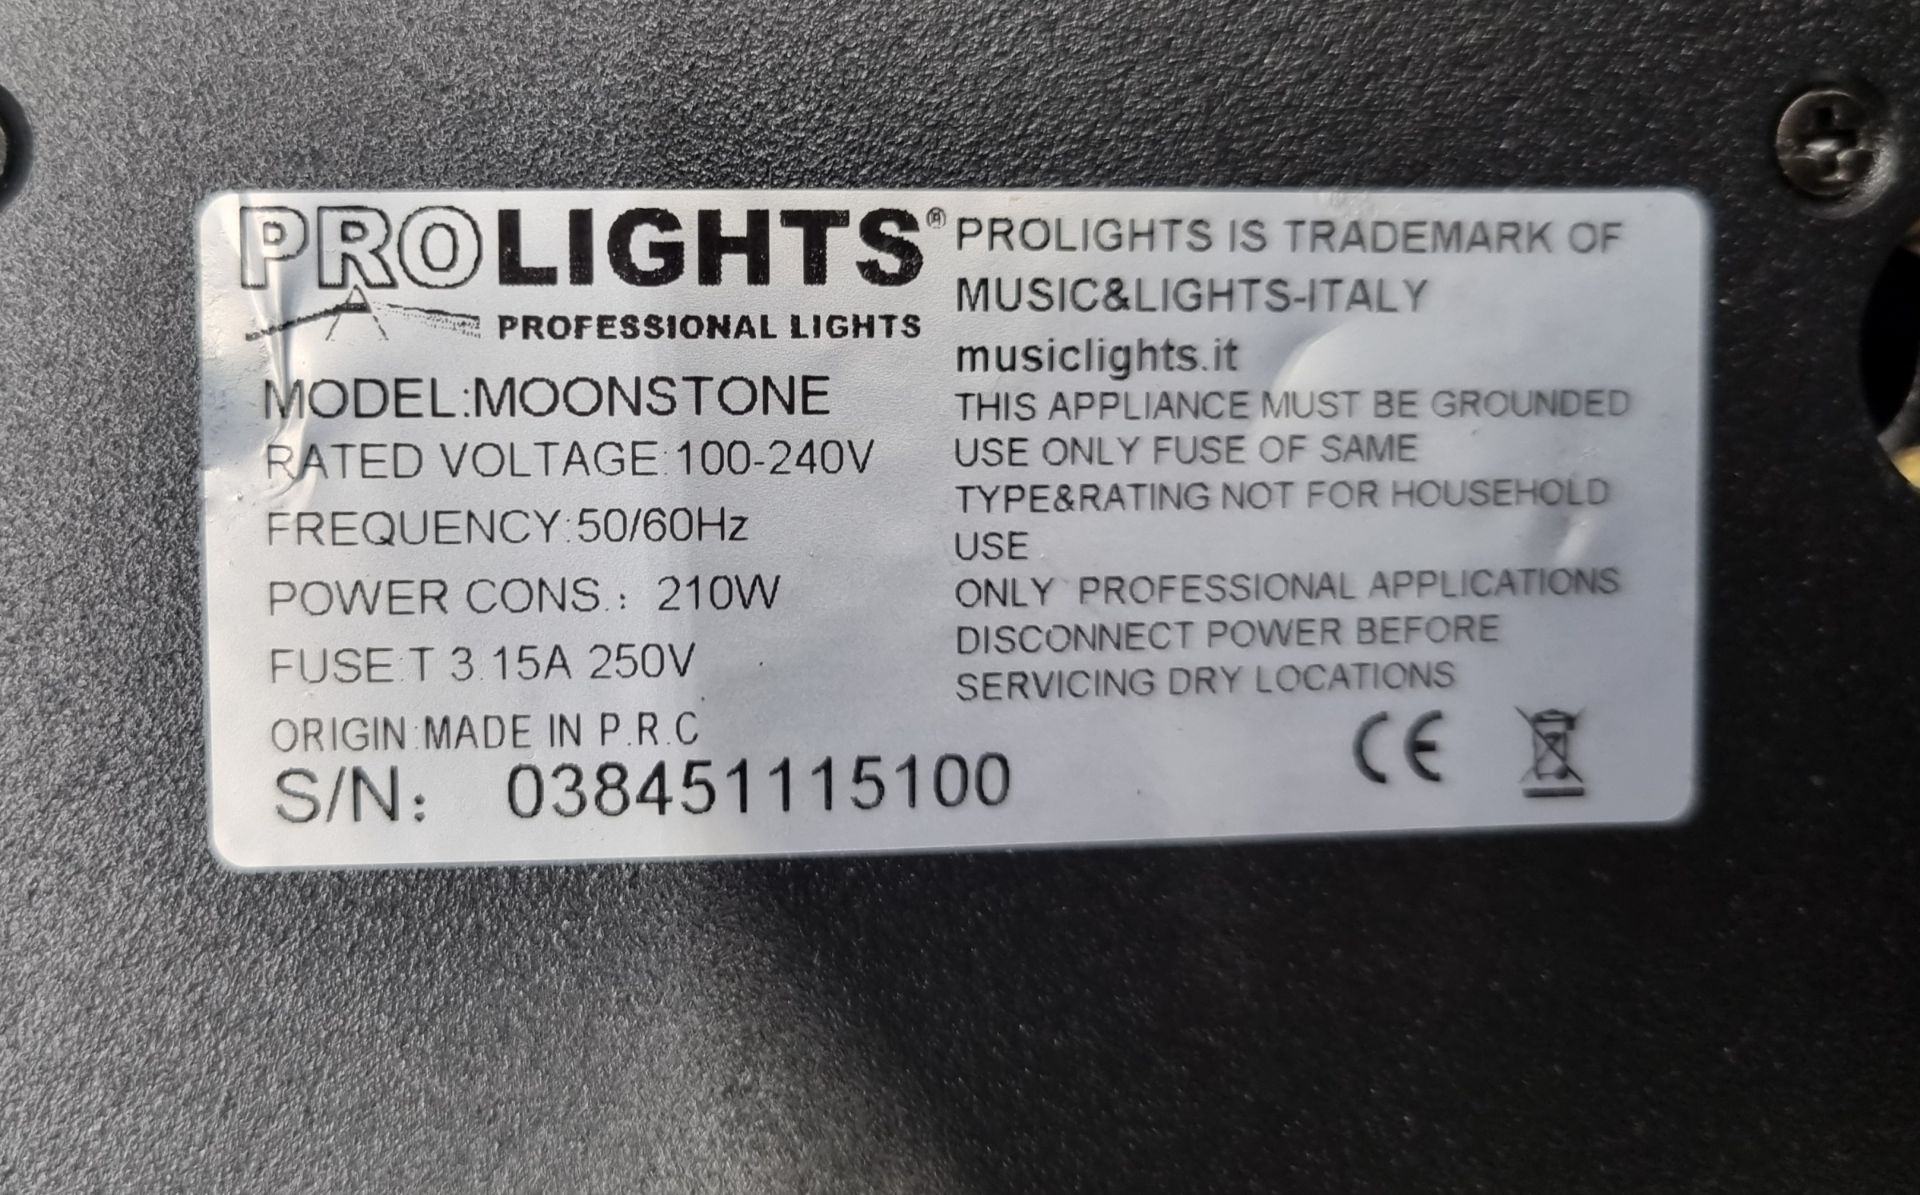 2x Prolights Moonstone LED spot moving head lights with flight case - 1x LIGHT SPARES OR REPAIRS - Image 10 of 14